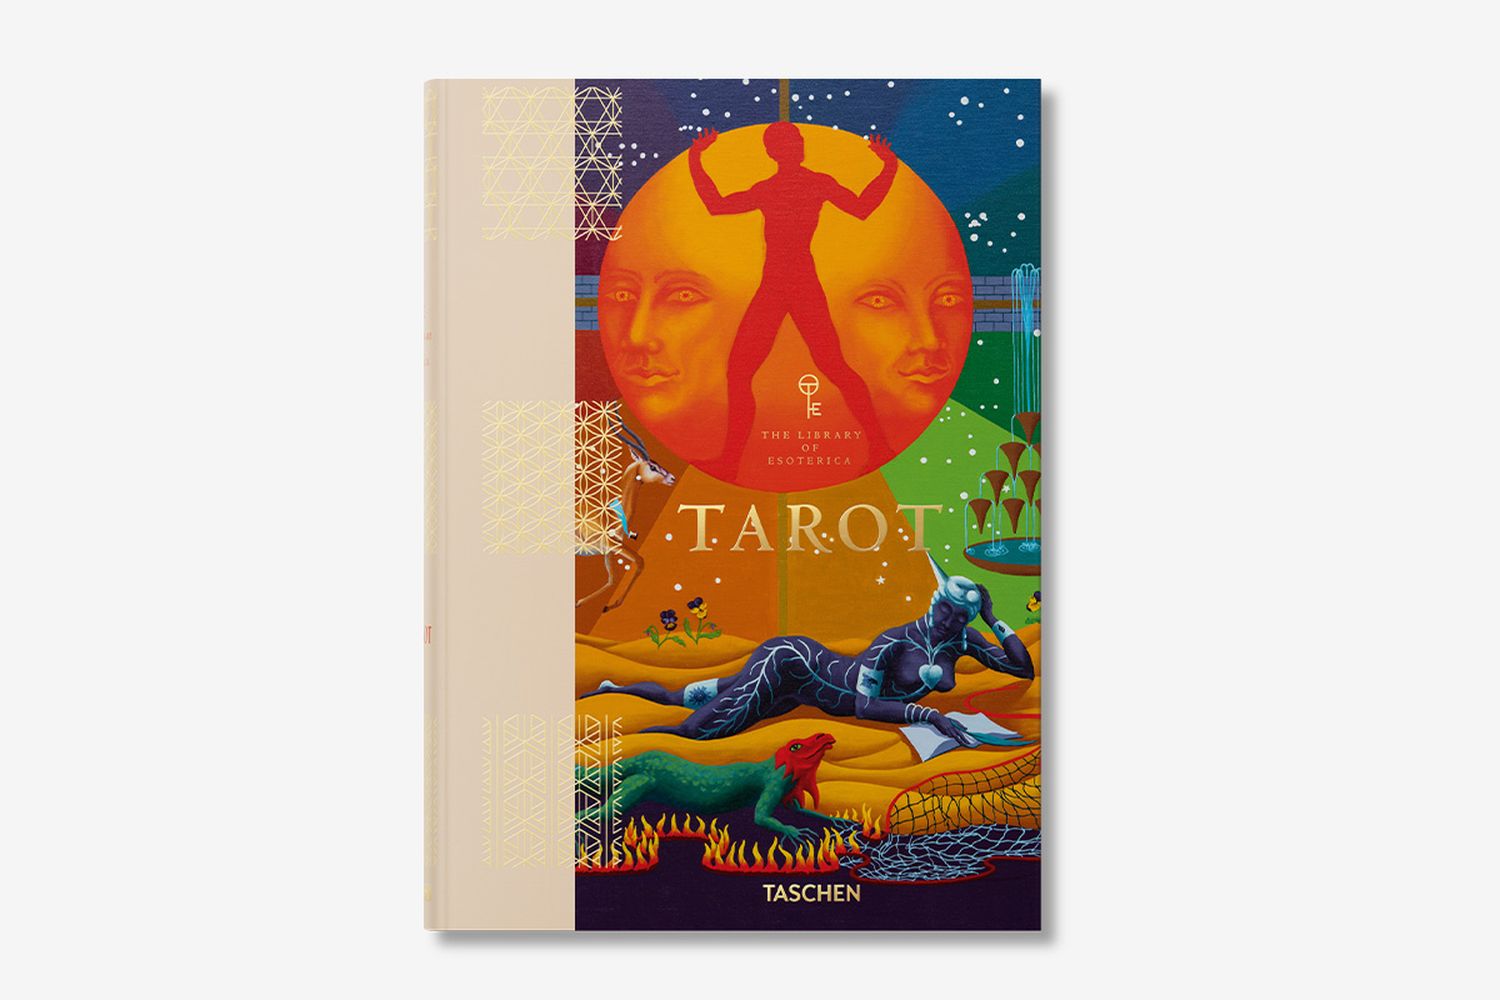 Tarot: The Library of Esoterica